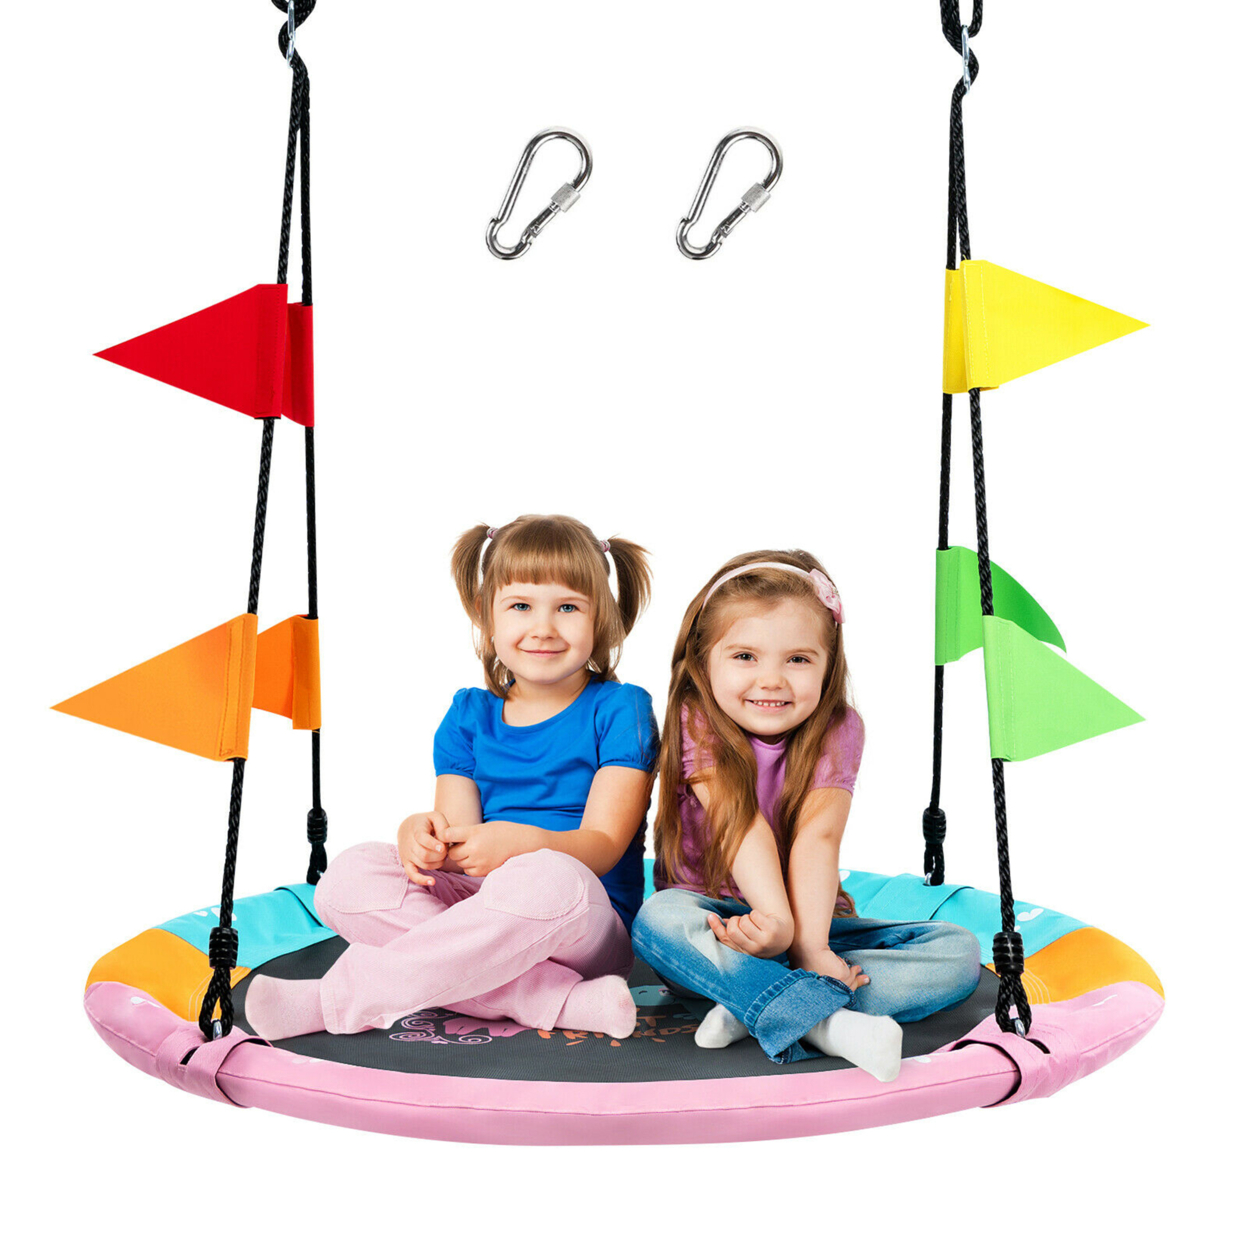 40'' Flying Saucer Tree Swing Indoor Outdoor Swing Play Set W/Hanging Strap Horse